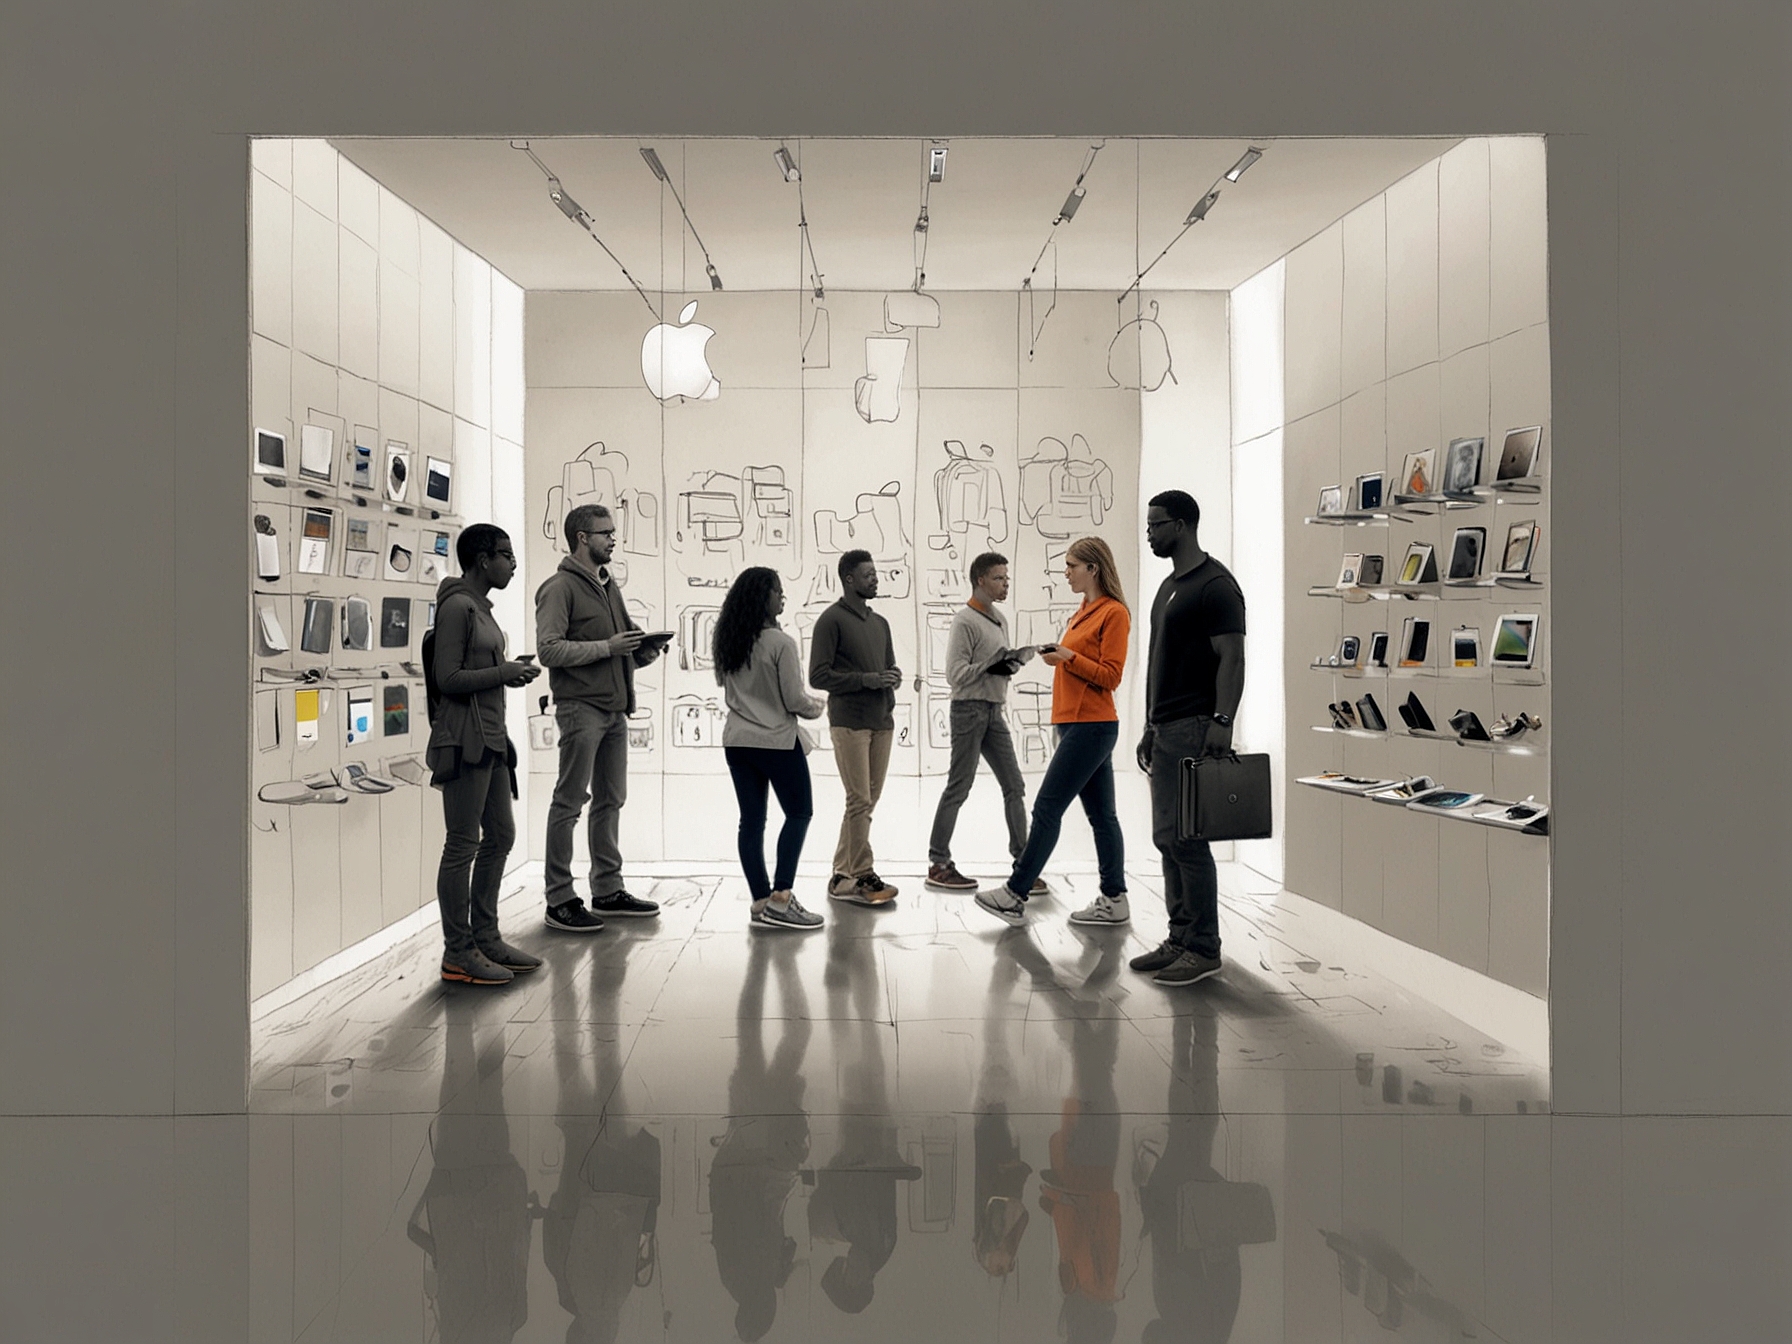 A dynamic illustration showcasing Apple's diverse range of products, including iPhones, MacBooks, and wearables, highlighting its innovative approach and market leadership.